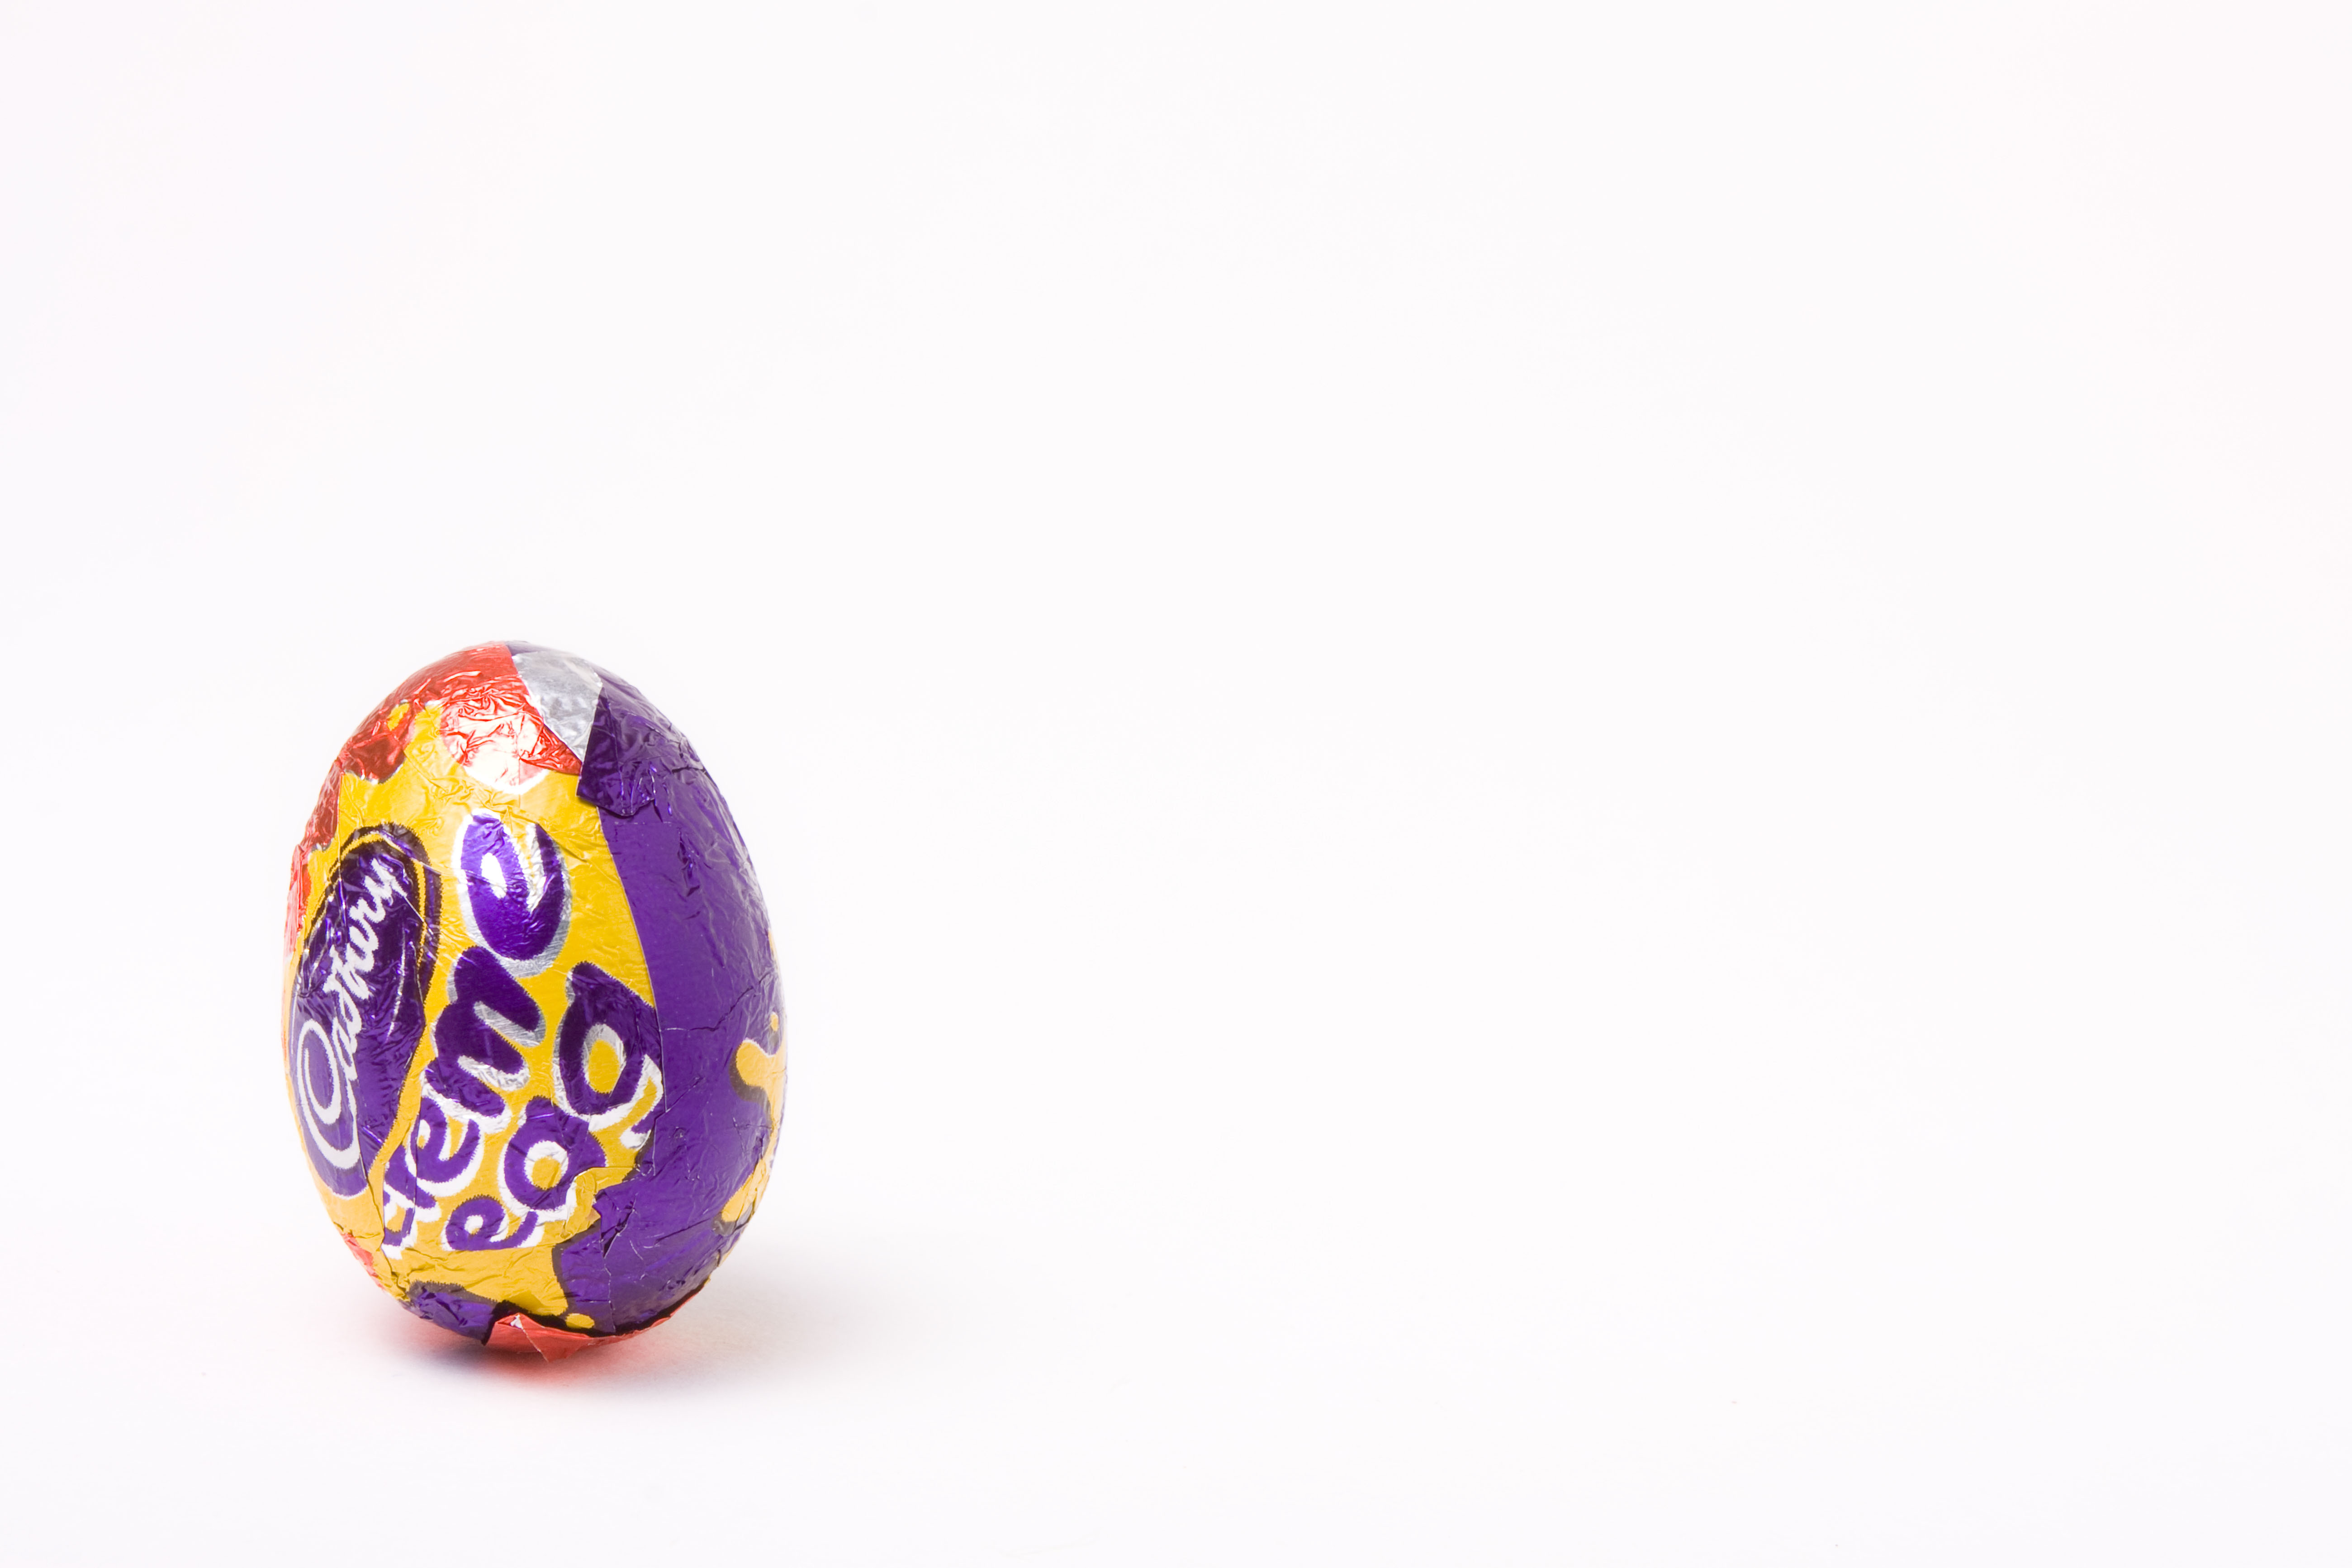 Five-packs of Cadbury Creme, Caramel and Oreo eggs are down to £1.25